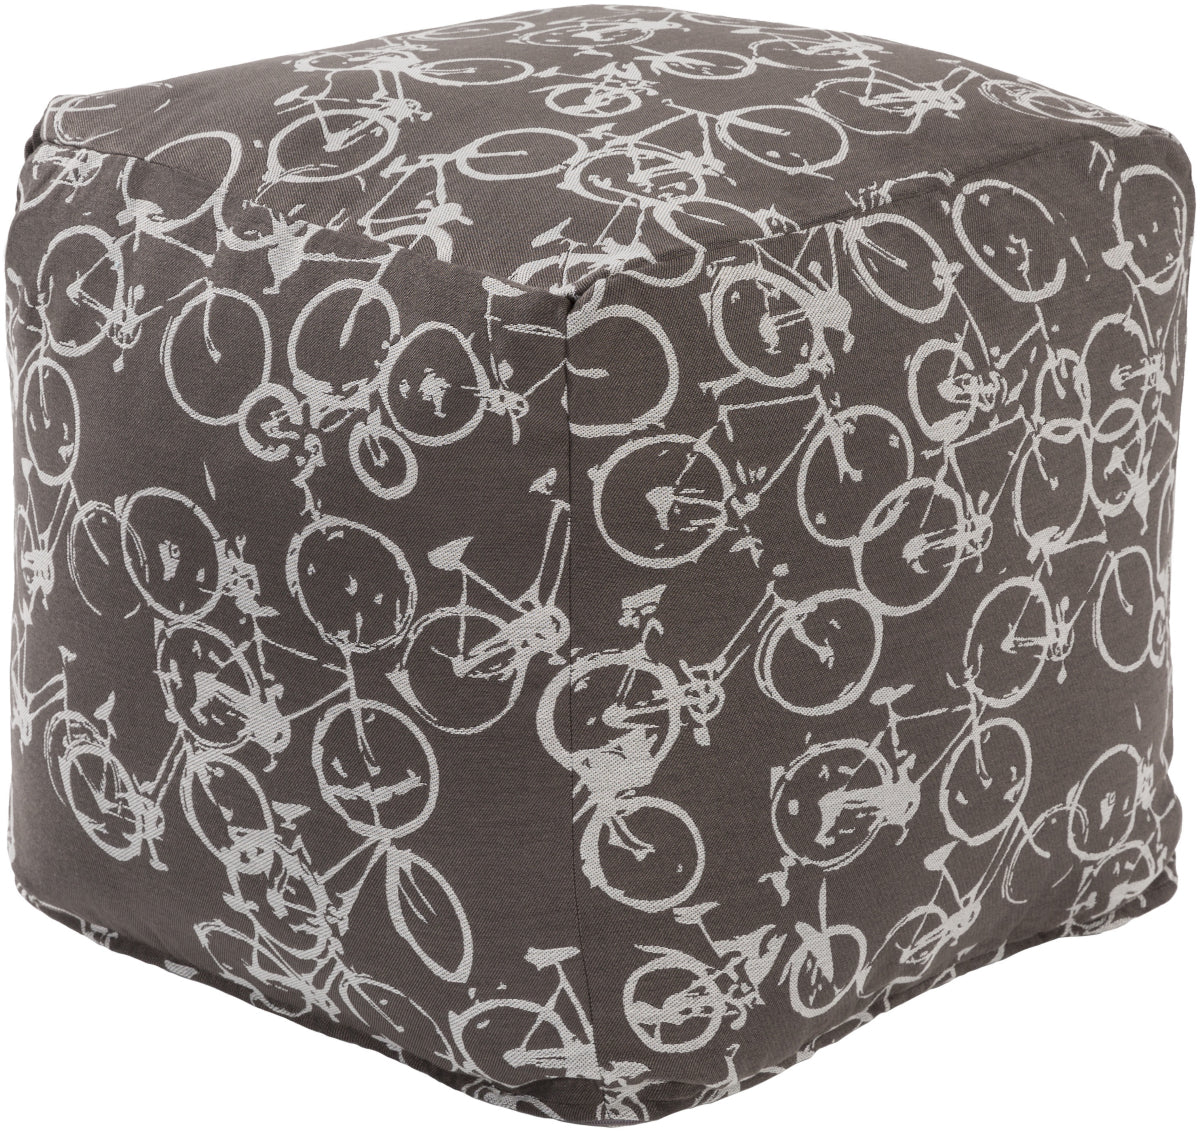 Surya Peddle Power PDPF-005 Brown Pouf by Mike Farrell main image